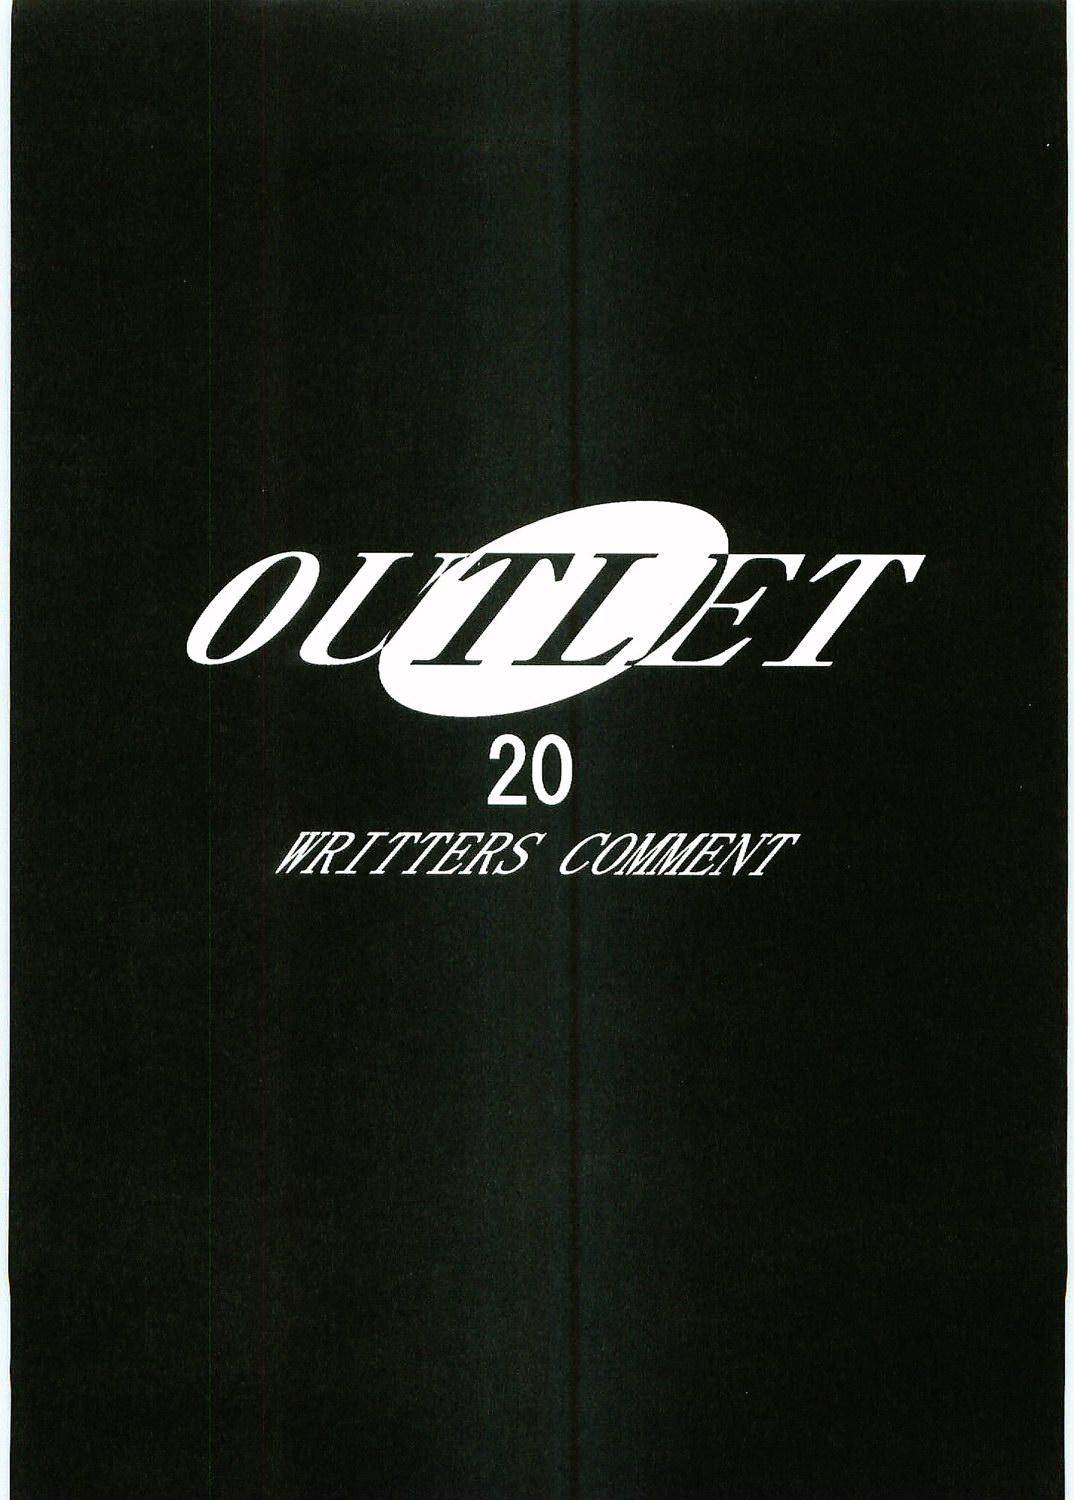 OUTLET 20 41